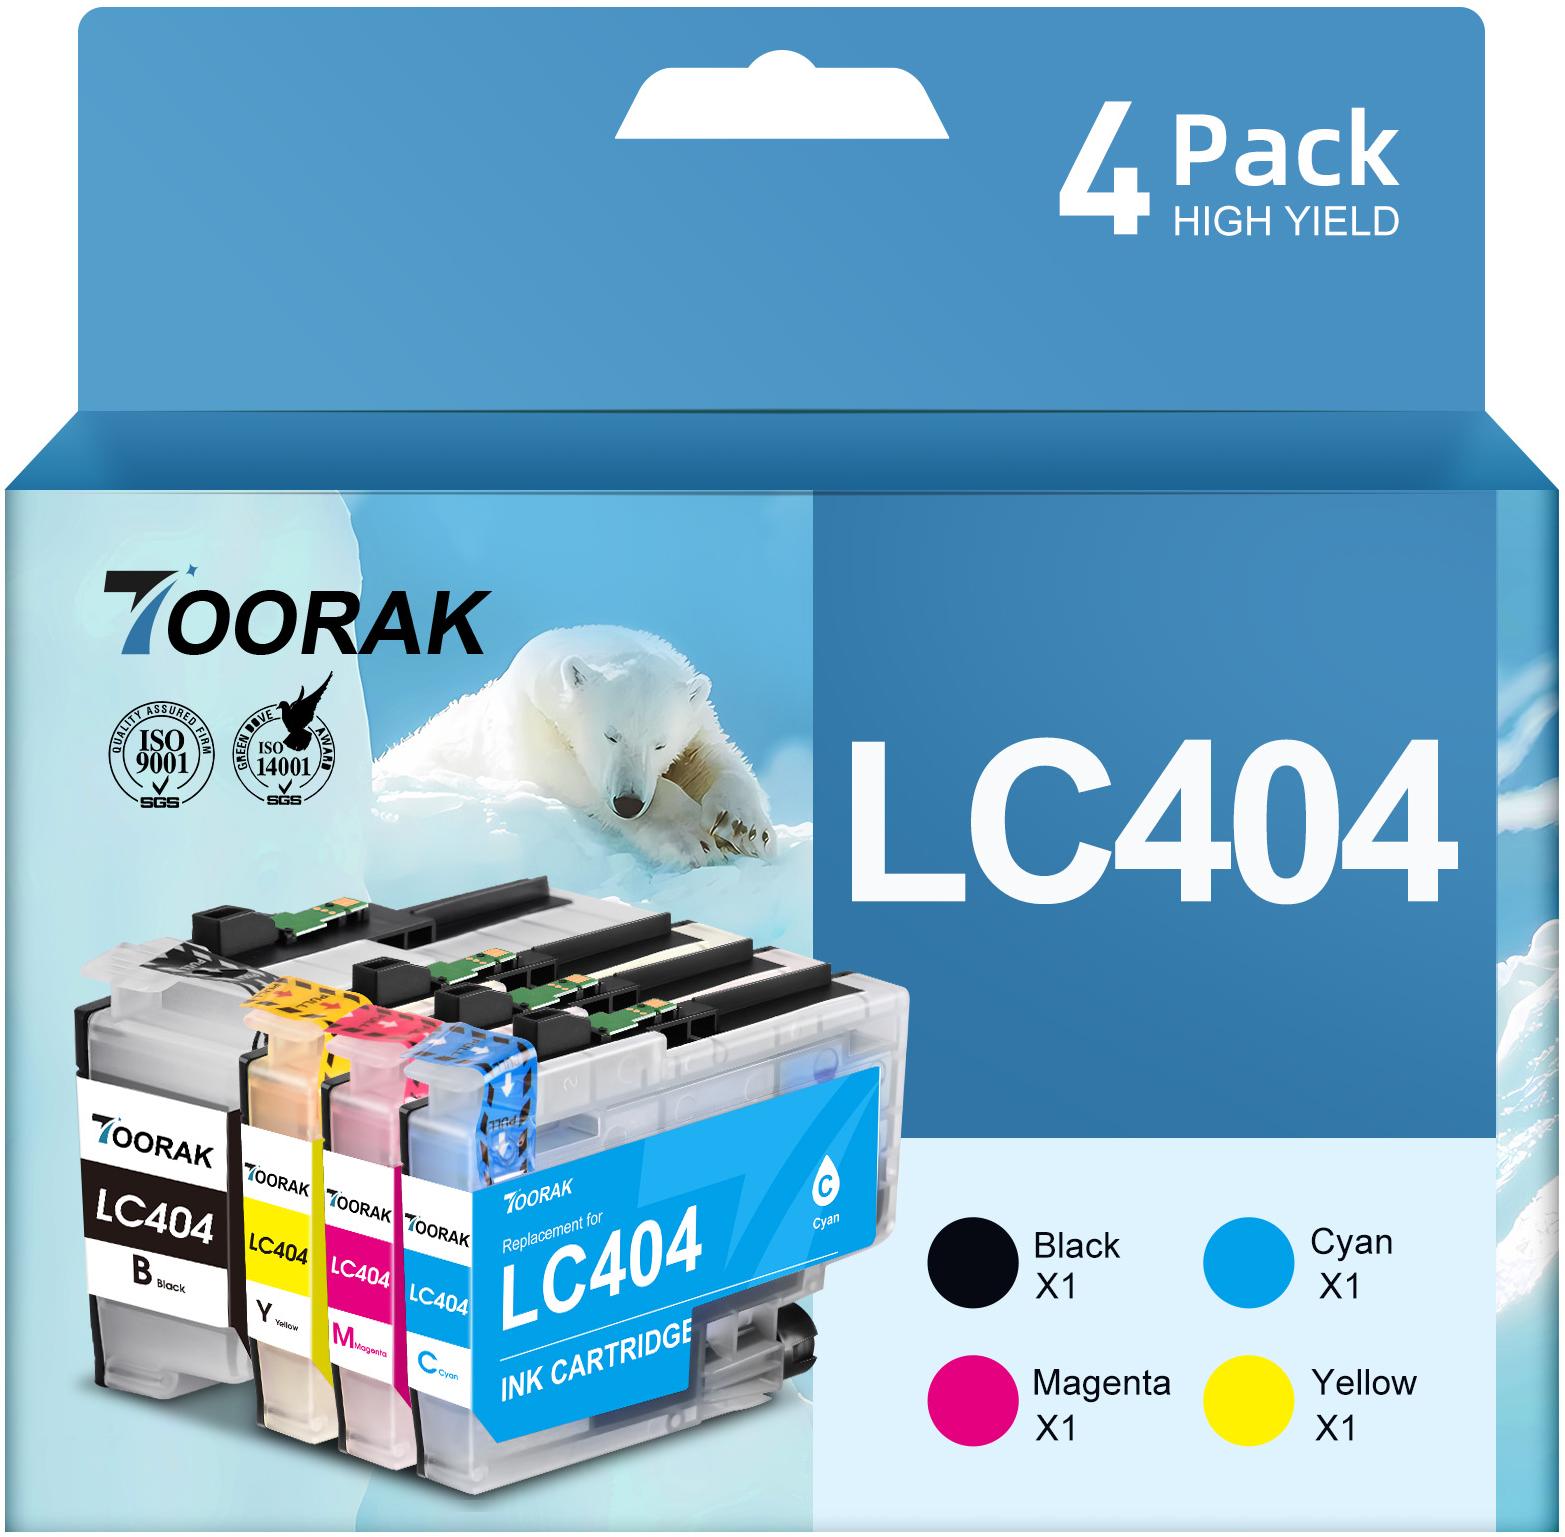 Lc404 Ink Cartridges For Lc404 Brother Ink Cartridges For Brother Mfc J1205w Mfc J1215w Mfc 1980